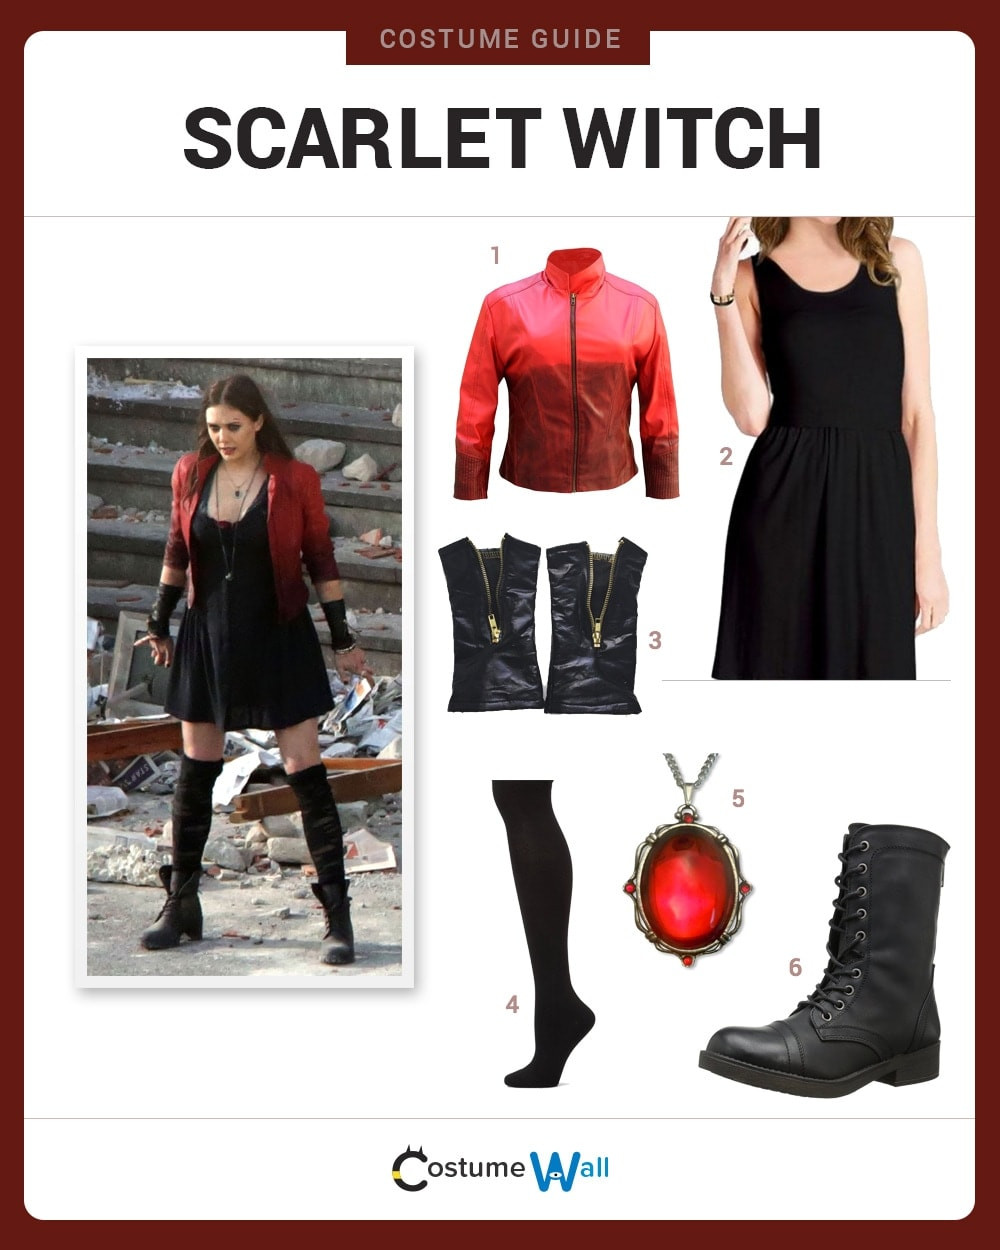 Scarlet Witch Costume DIY
 How to Dress Up As Your Favorite Superhero This Halloween